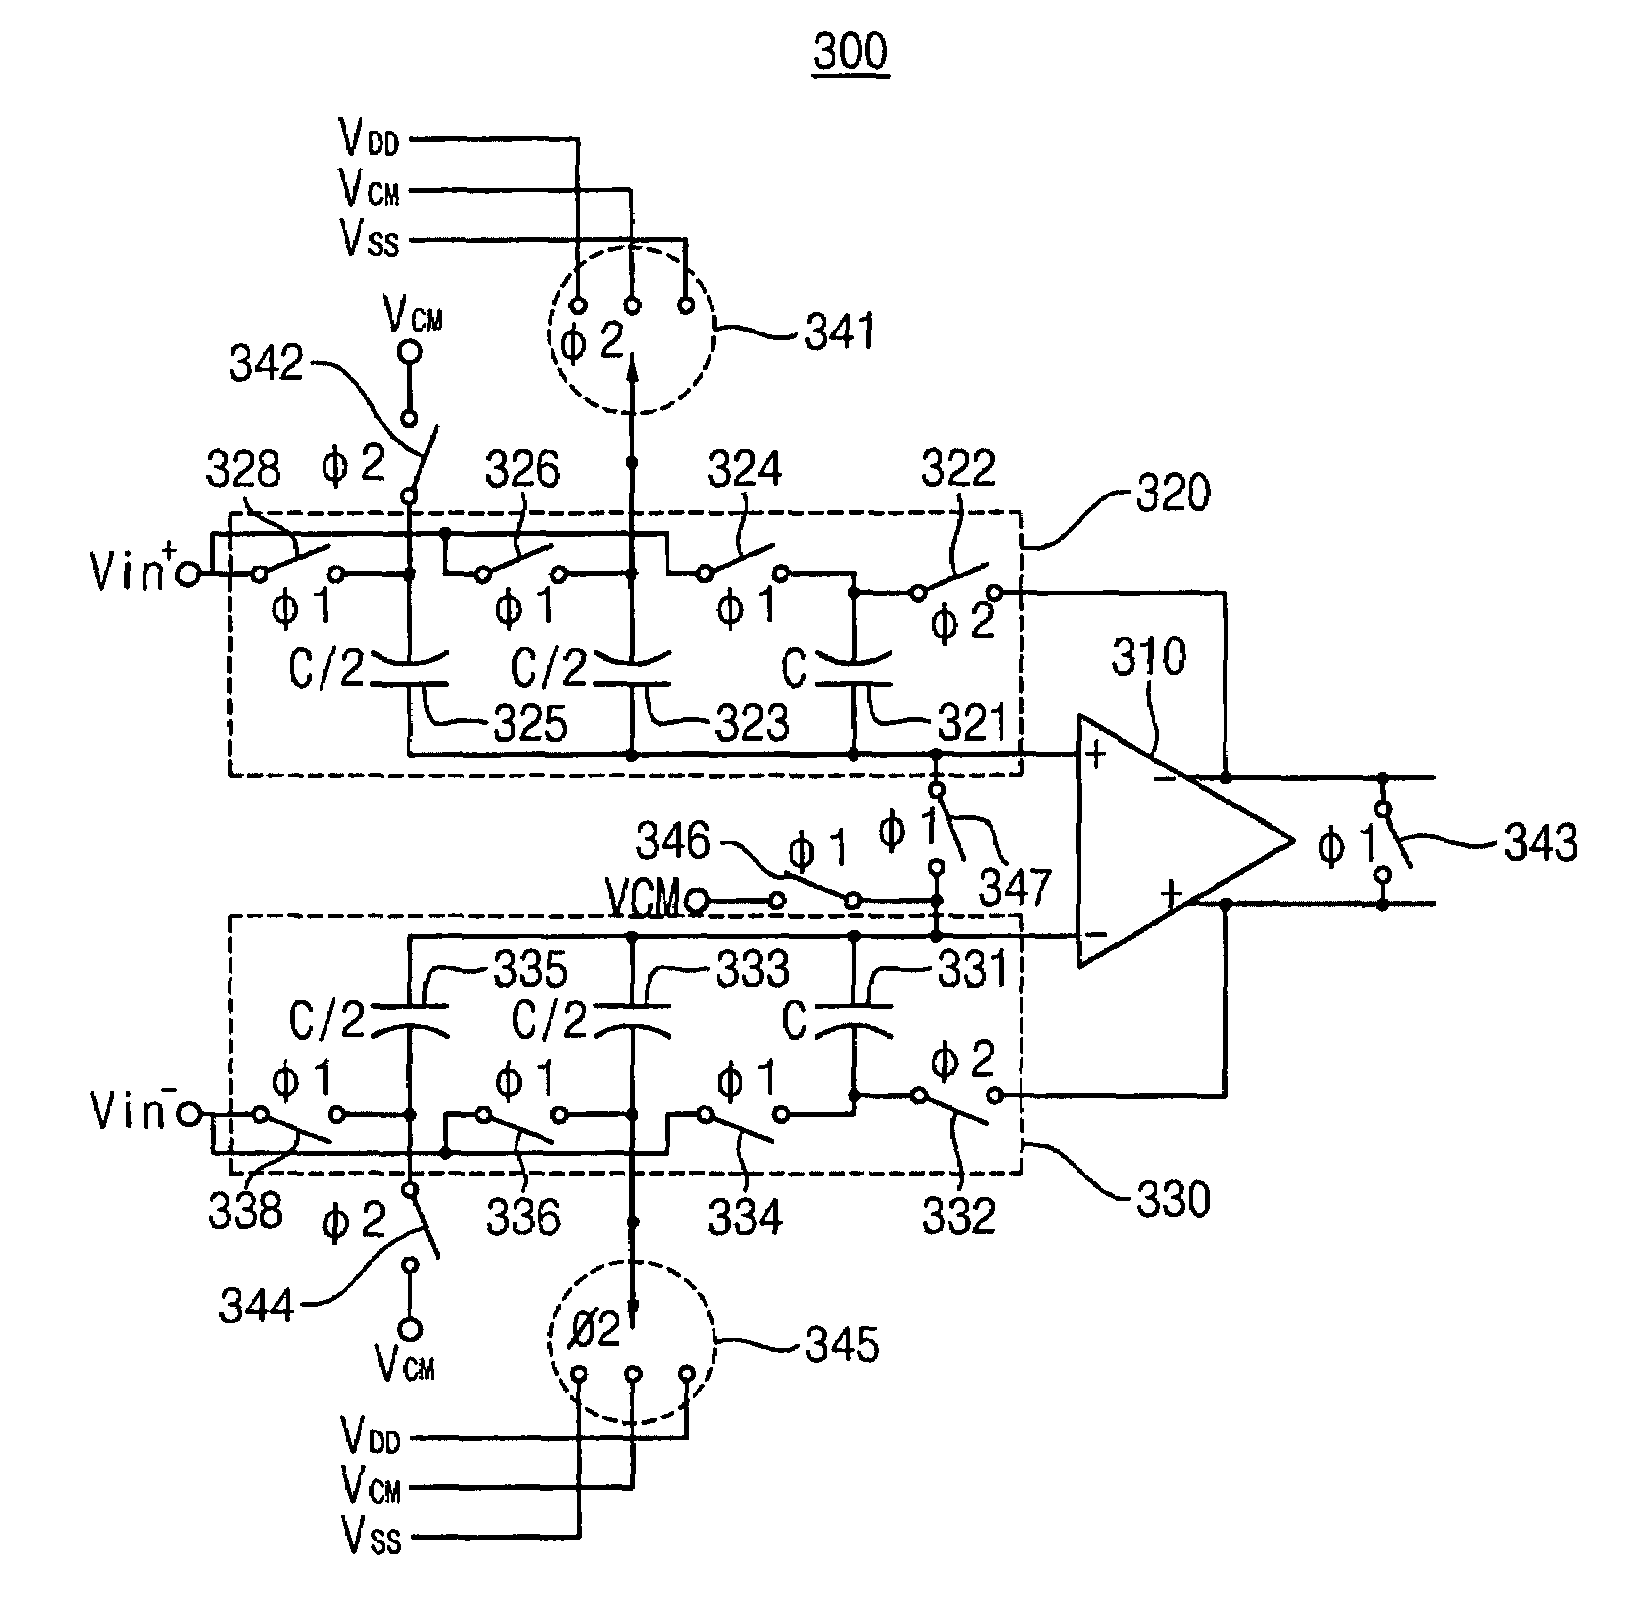 Pipelined analog-to-digital converter and method of analog-to-digital conversion